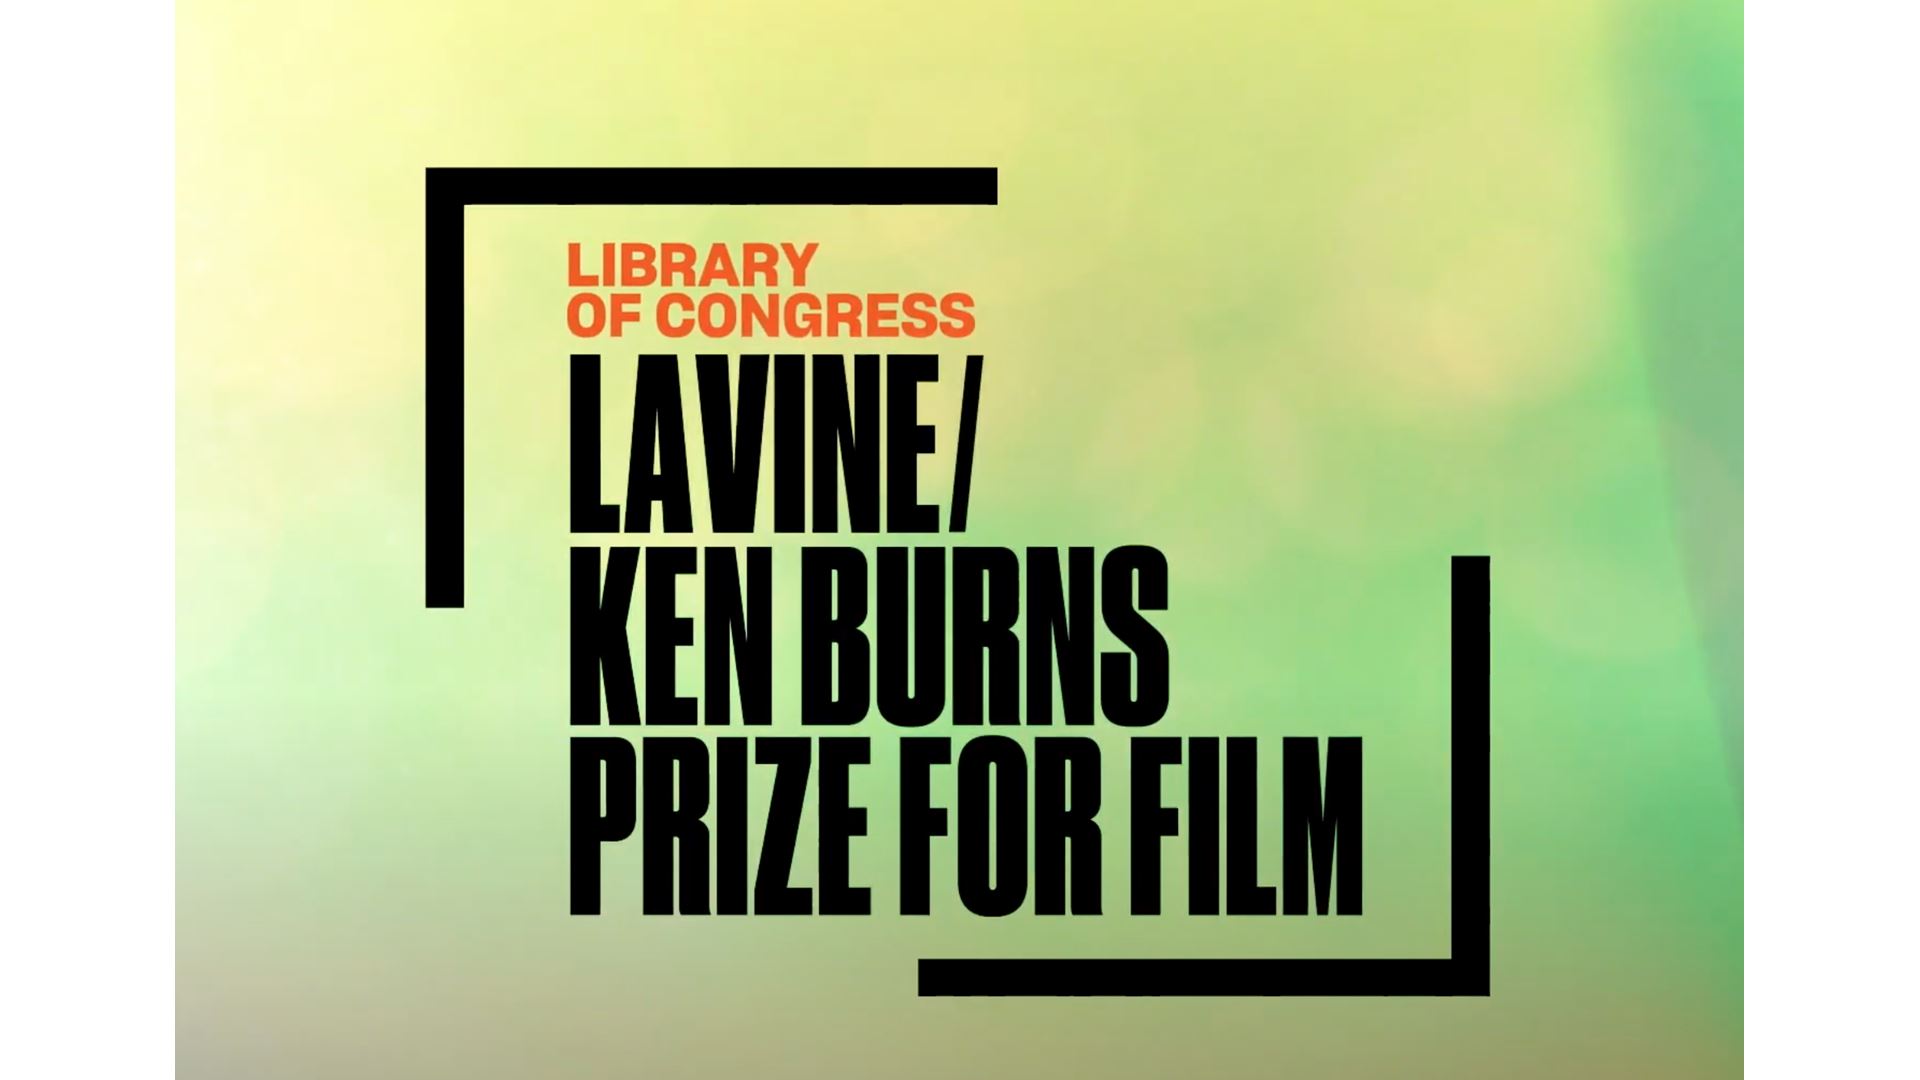 Open Submissions for Fifth Annual Library of Congress Lavine/Ken Burns Prize for Film